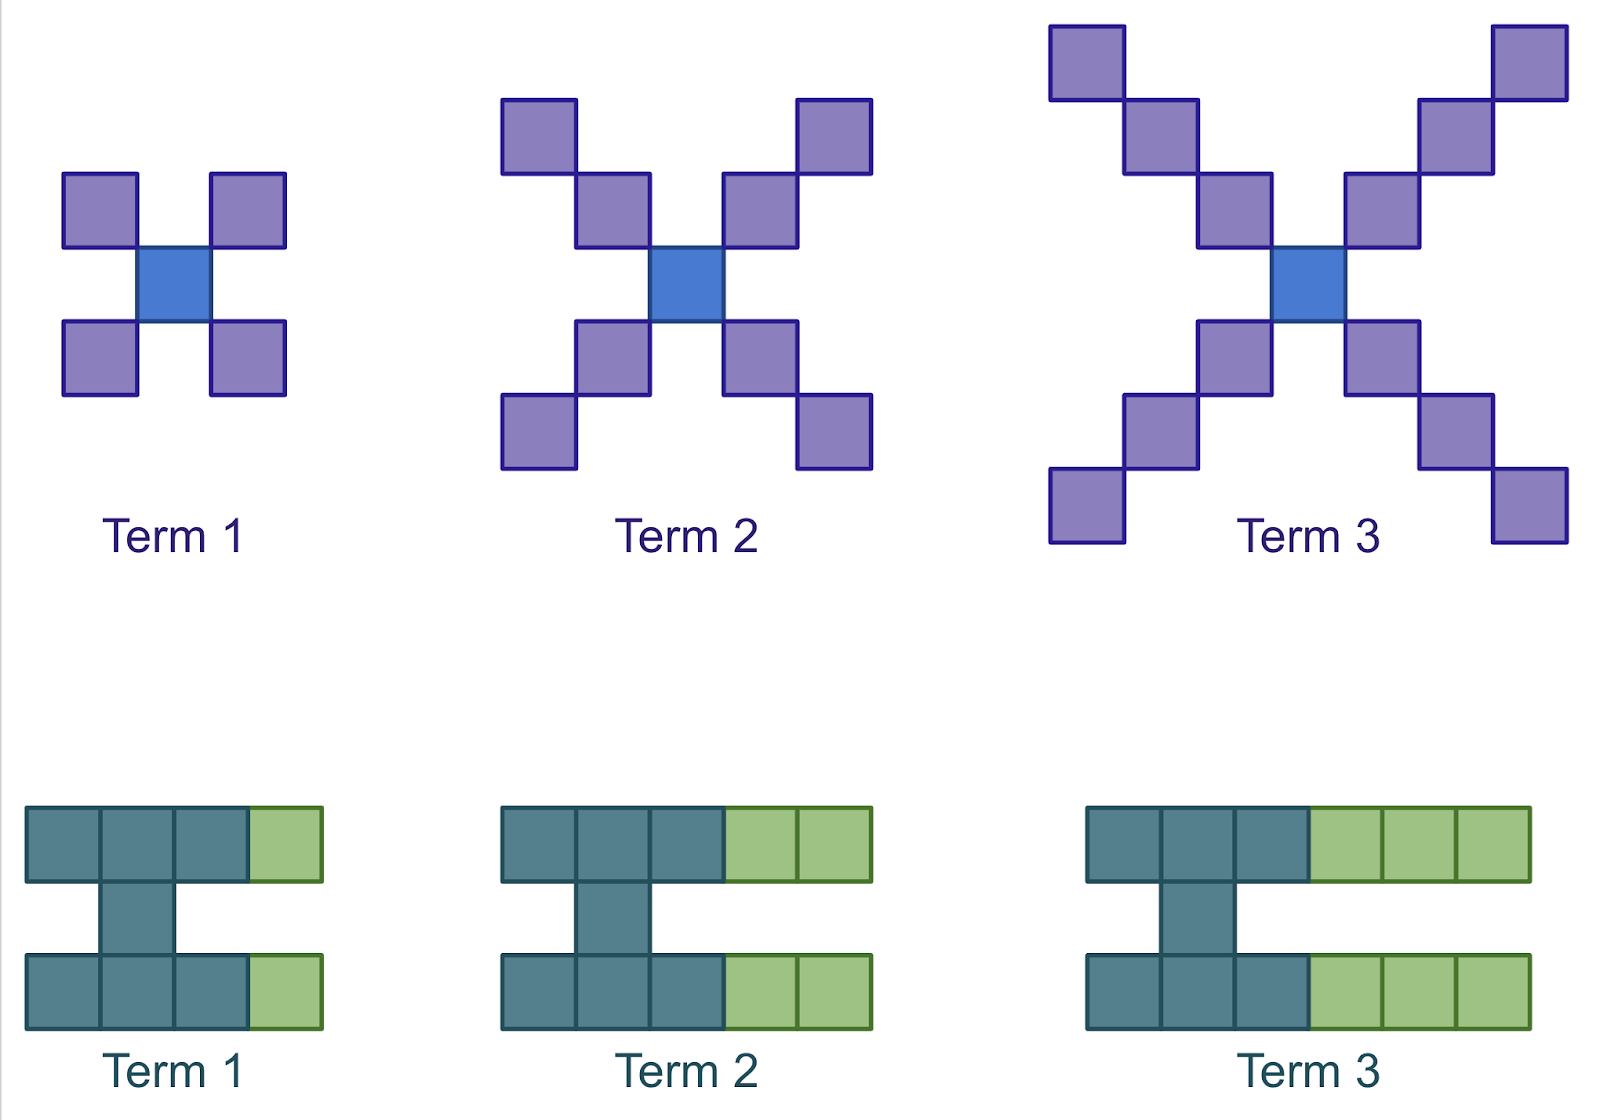 Two growing patterns represented visually by coloured squares. The first pattern is x shaped and extends outwards, with Term 1 built of 5 squares, Term 2 built of 9 squares, and Term 3 built of 13 squares. The second pattern is two rows of squares, connected by a single square between, and extends to the right. Its Term 1 is built of 9 squares, Term 2 is built of 11 squares, and Term 3 is built of 13 squares.